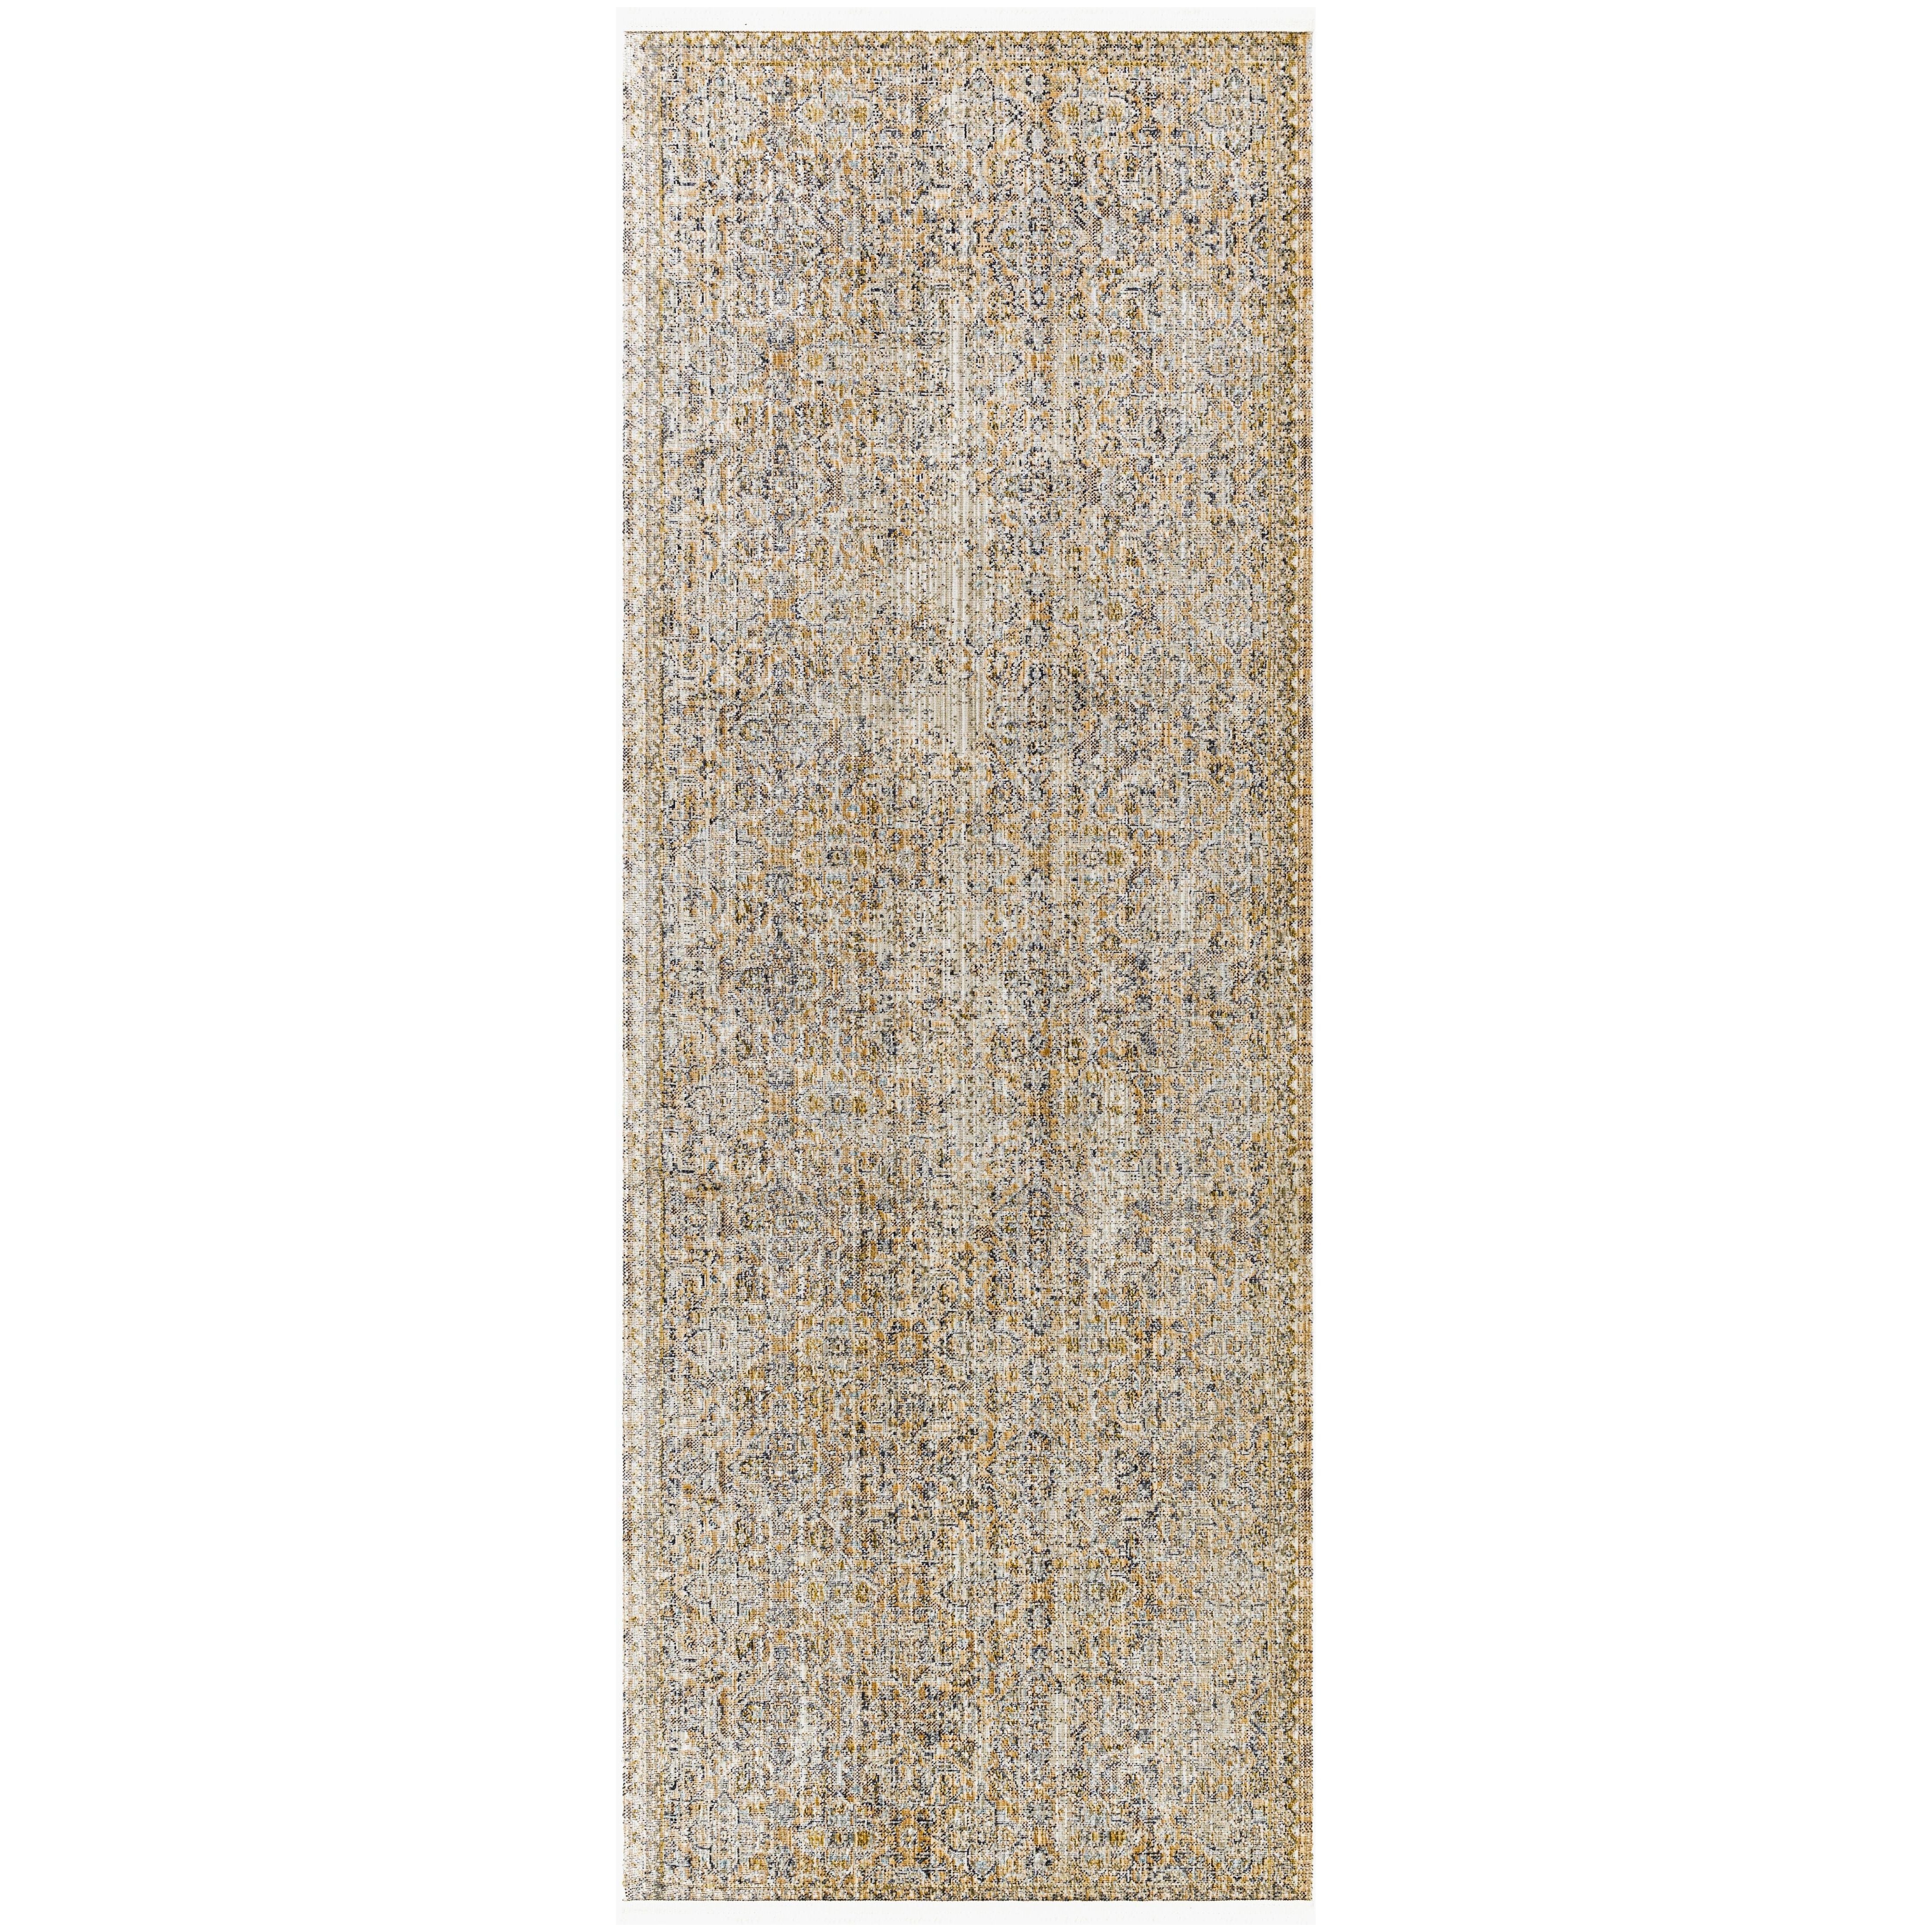 The Margaret area rug is the perfect addition to any room in your home. Designed as a special collaboration between Surya and Becki Owens, this stunning piece is sure to be the center of attention wherever it's placed. Its classic design features a distressed look of beautiful warm taupes and subtle touches of navy and gray. Amethyst Home provides interior design, new home construction design consulting, vintage area rugs, and lighting in the Kansas City metro area.